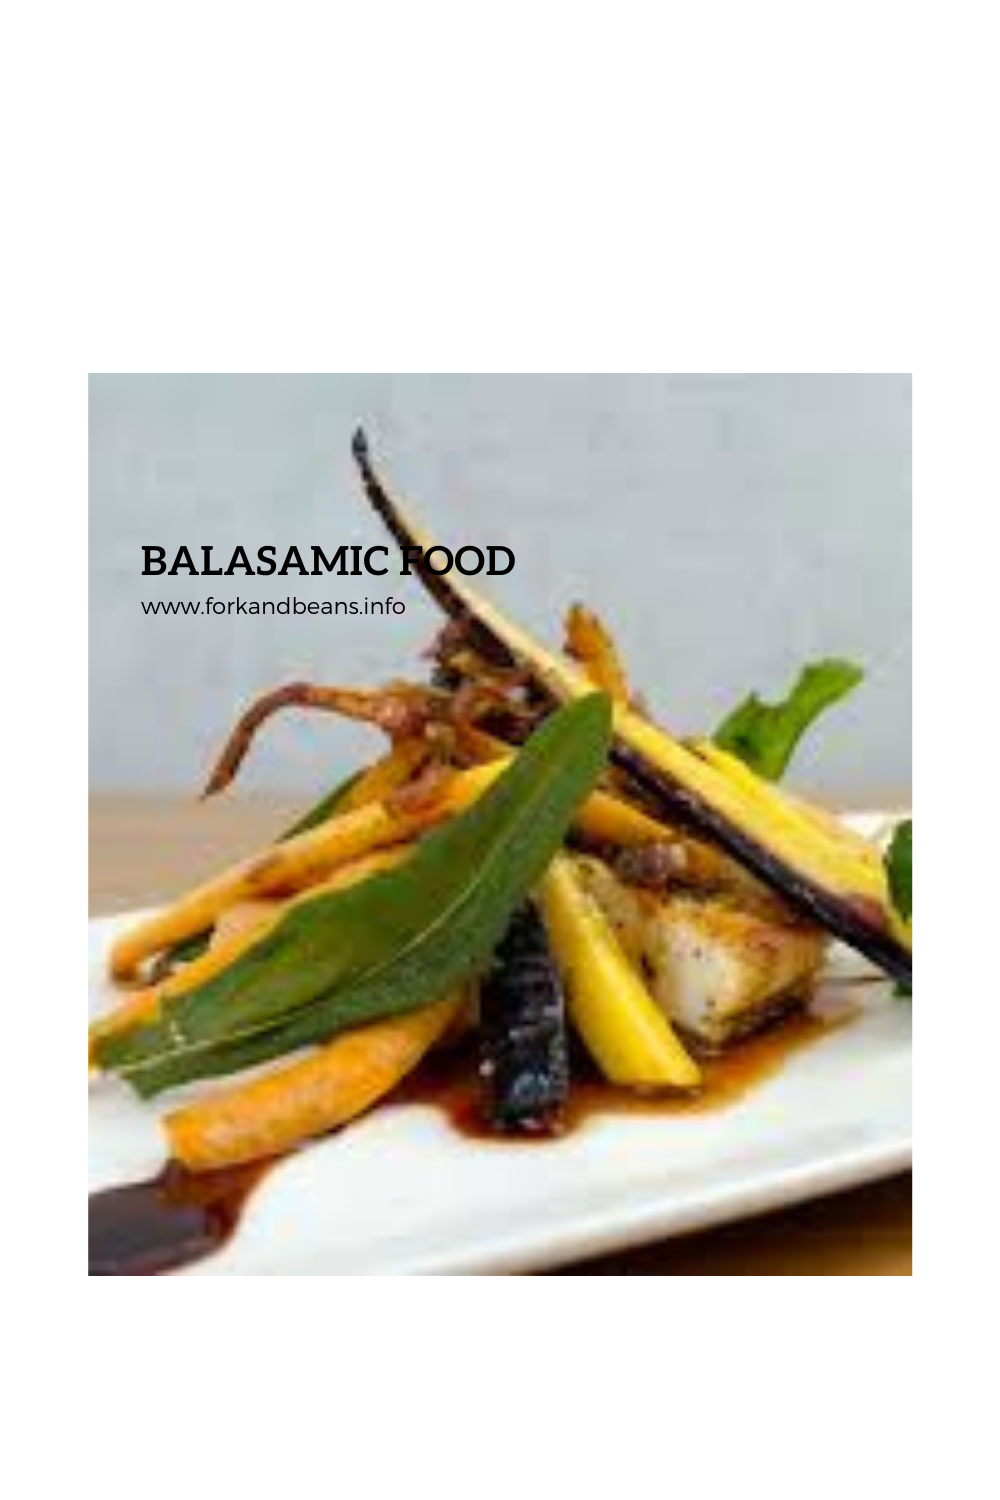 Heirloom carrots with rosemary balsamic demi-glace